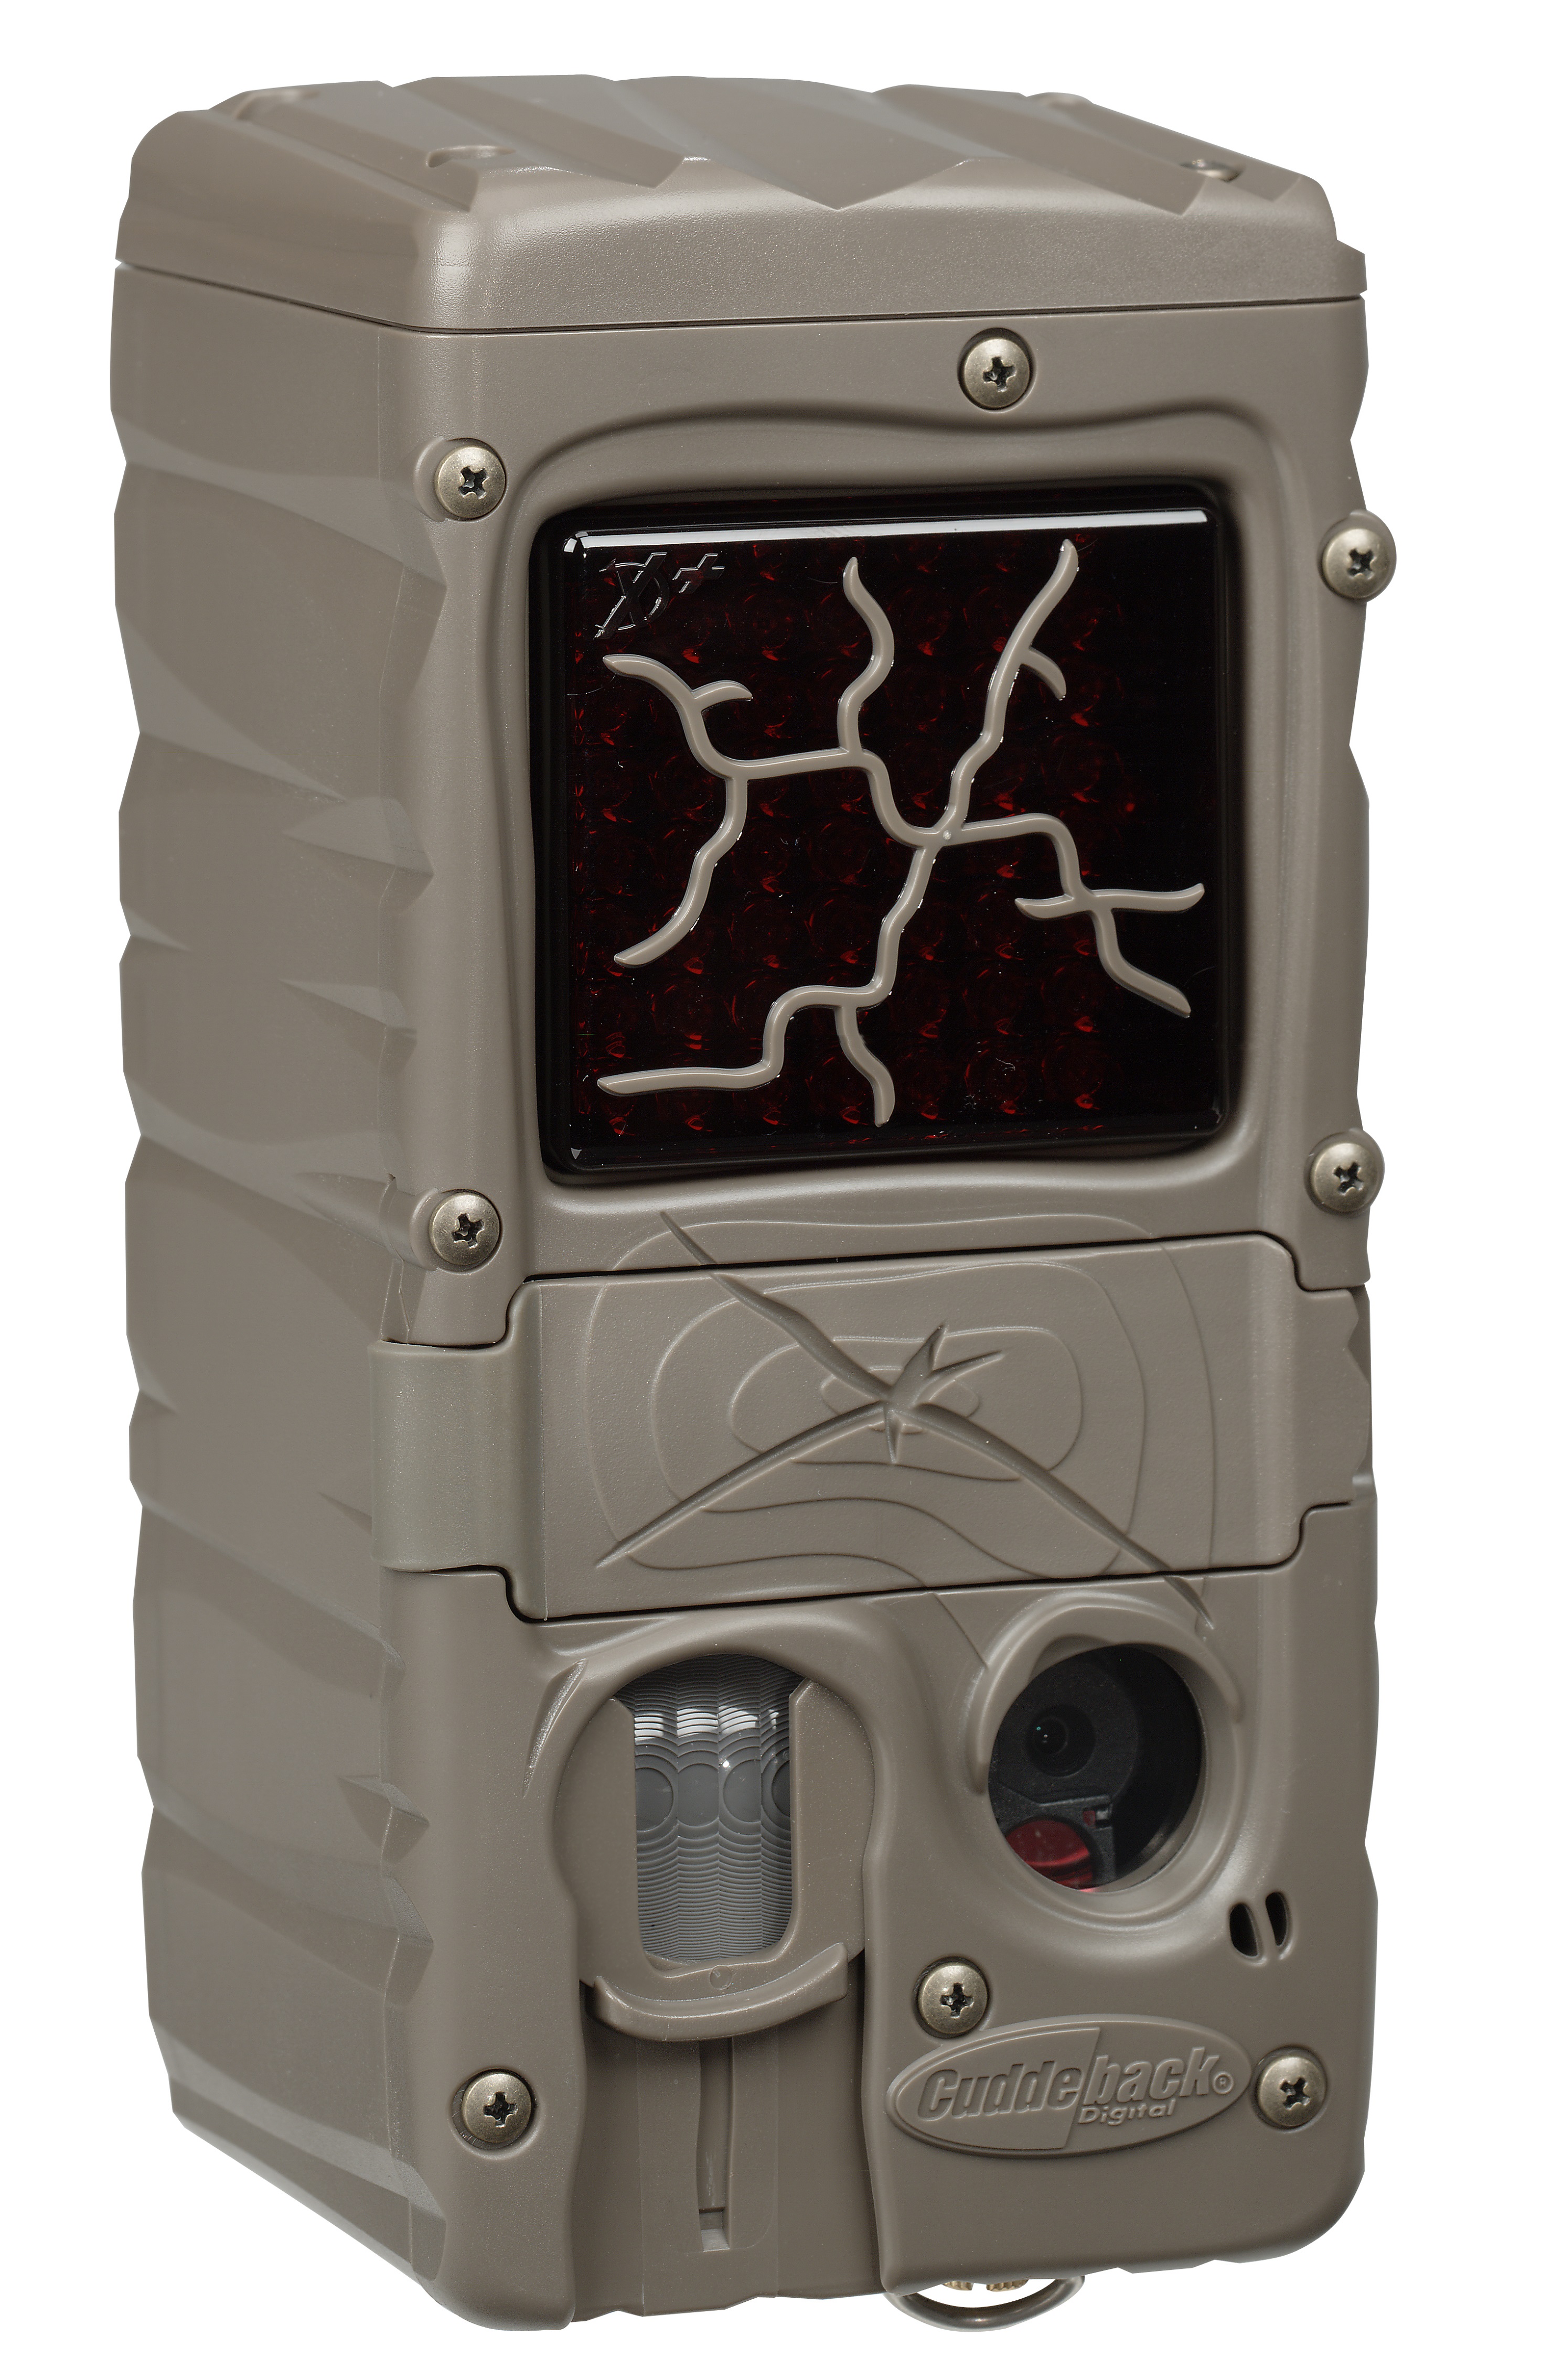 Cuddeback Dual Flash Cuddelink Invisible Infrared Game Trail Camera Security Box 